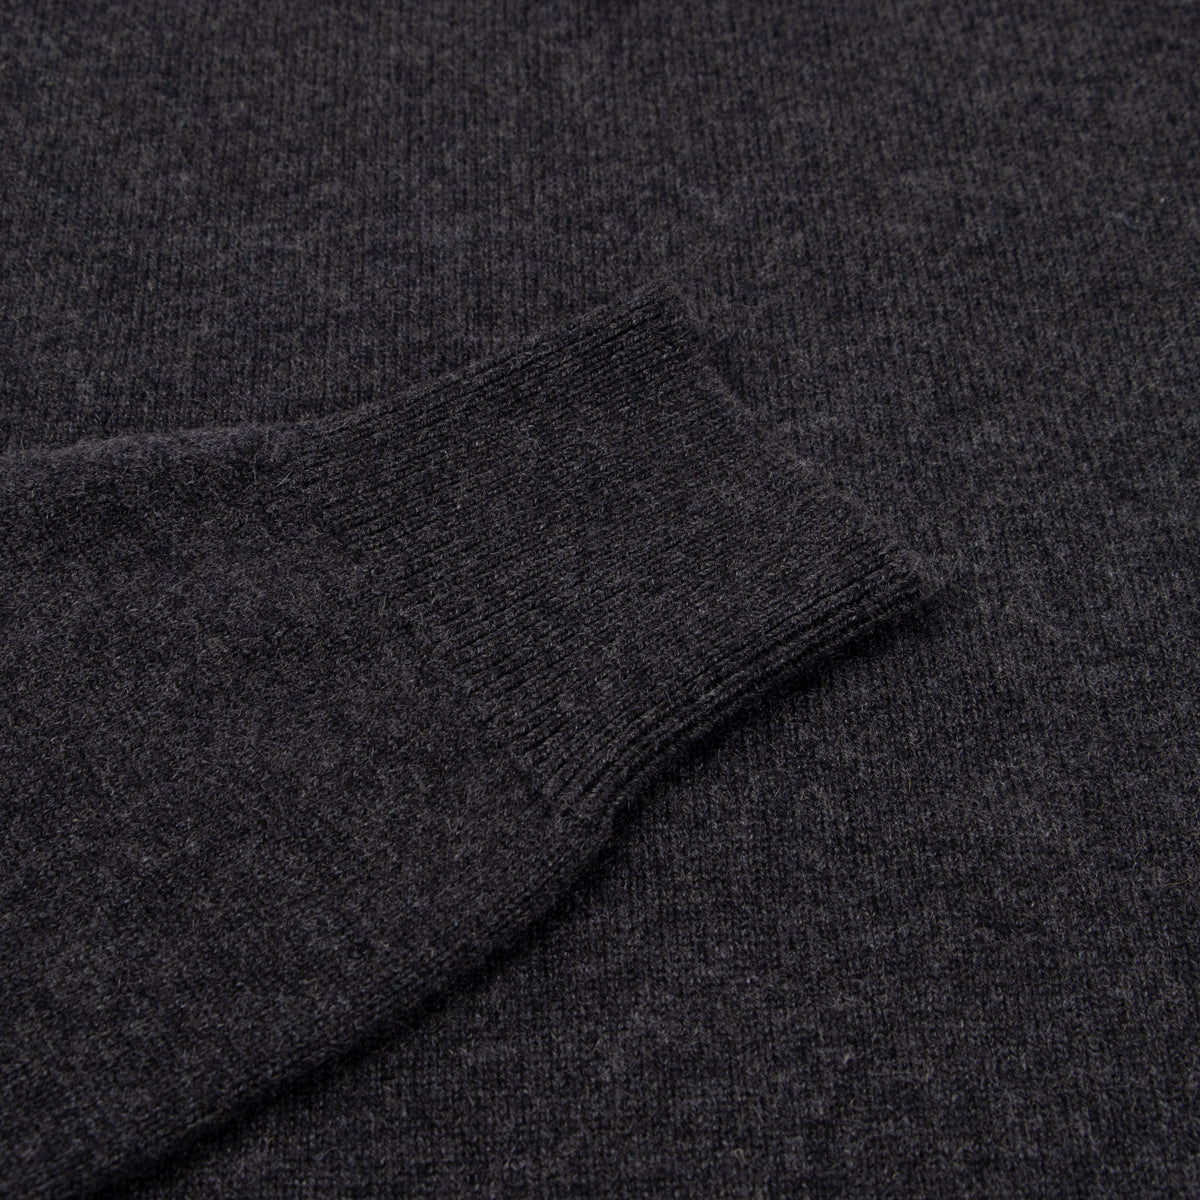 Charcoal Tobermorey 4ply V-Neck Cashmere Sweater  Robert Old   